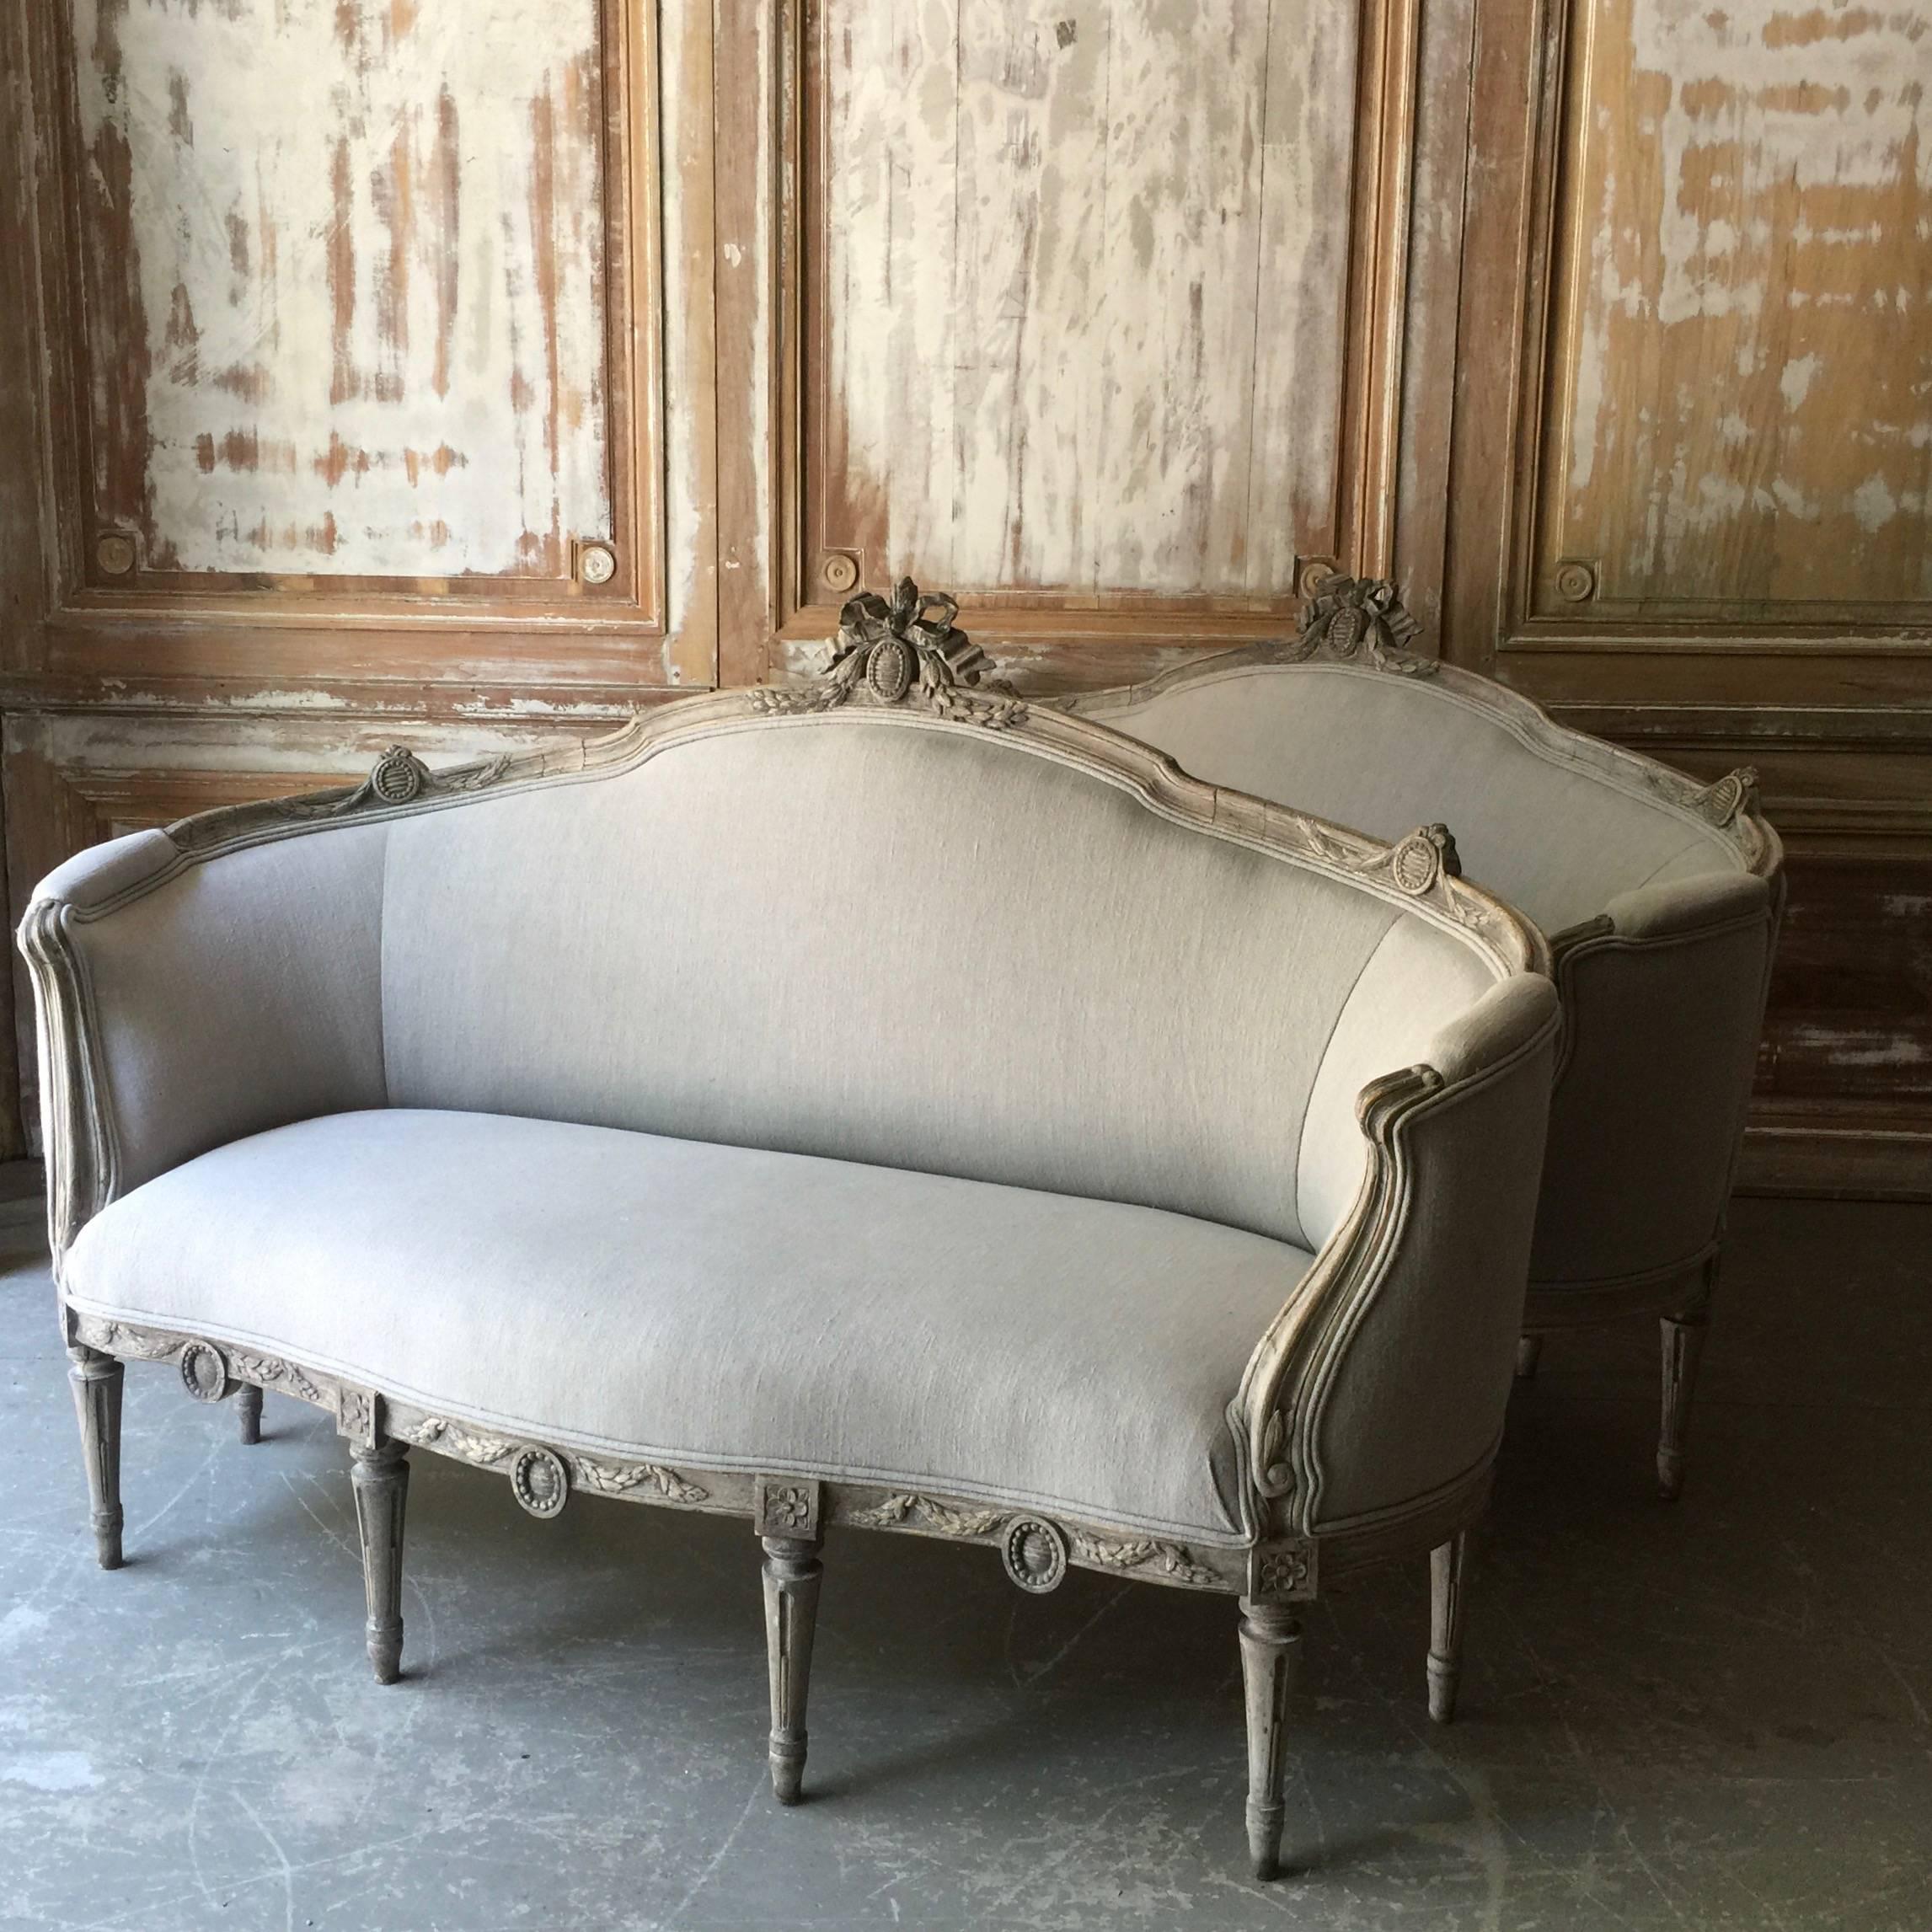 Very rare pair of decoratively carved Swedish Gustavian style sofas with back carved in knot of ribbon, fluted arms, carved apron and corner blocks on turned tapering legs.
The comfortable curved ends make these an excellent conversation